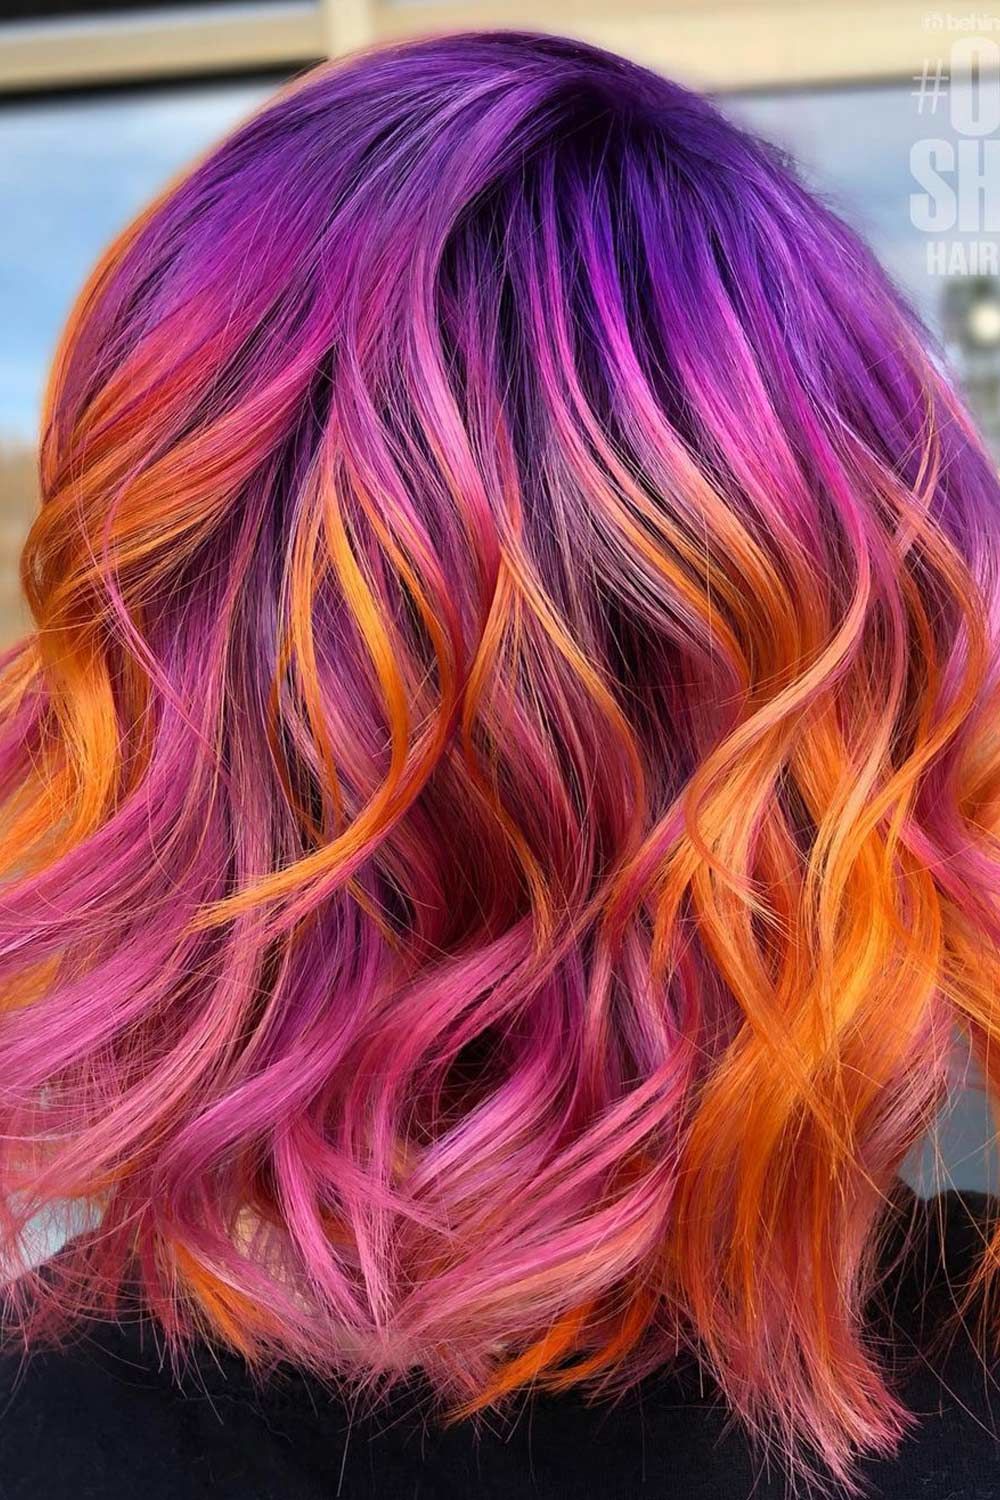 Sunset Hair Guide With Pro Tips And Ideas | Lovehairstyles.com